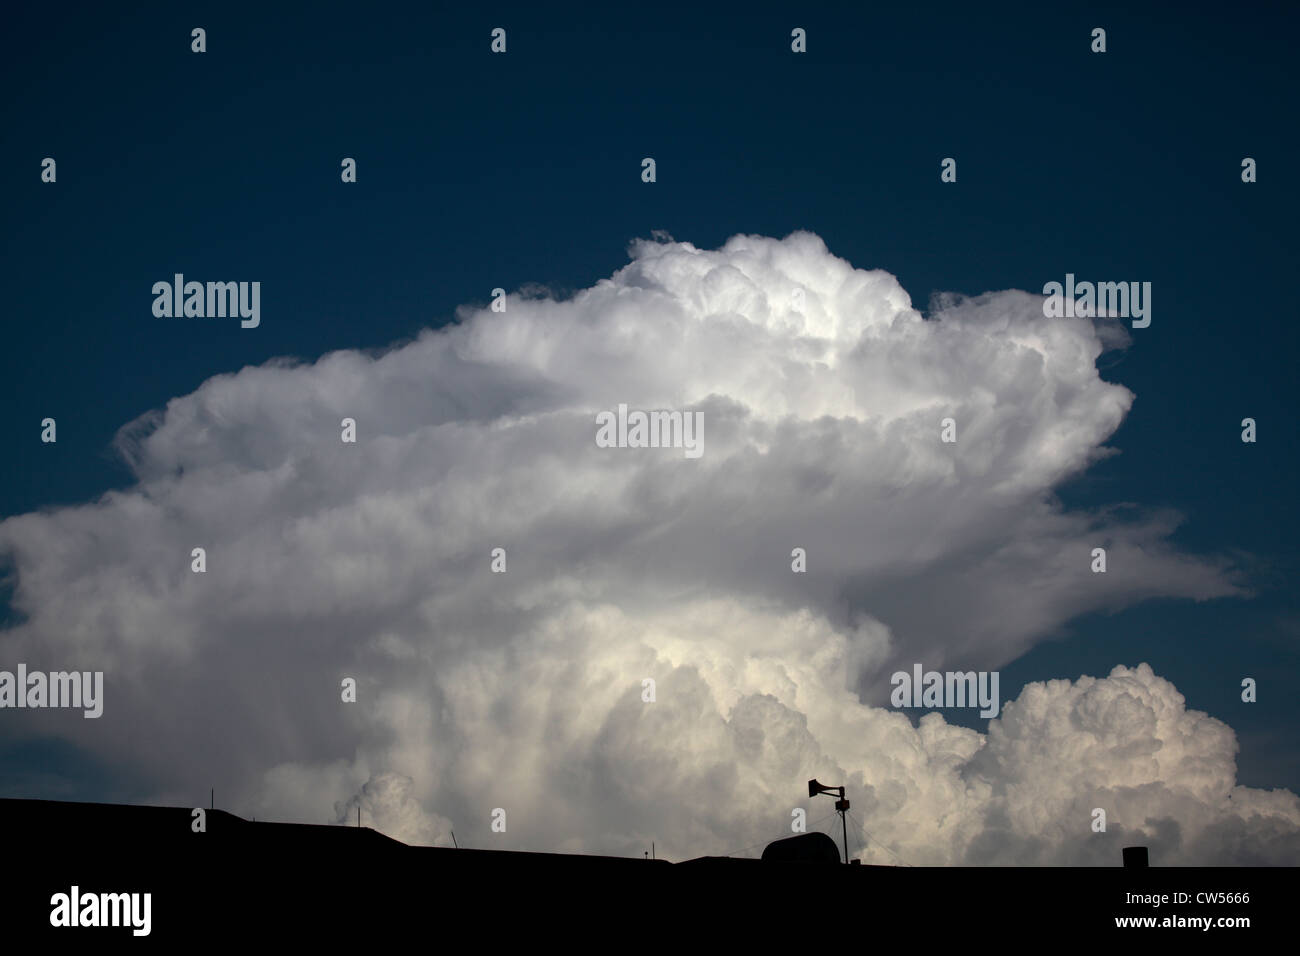 Rotating area of convection near top of rapidly forming cumulus cloud, with alert siren in lower corner. Stock Photo